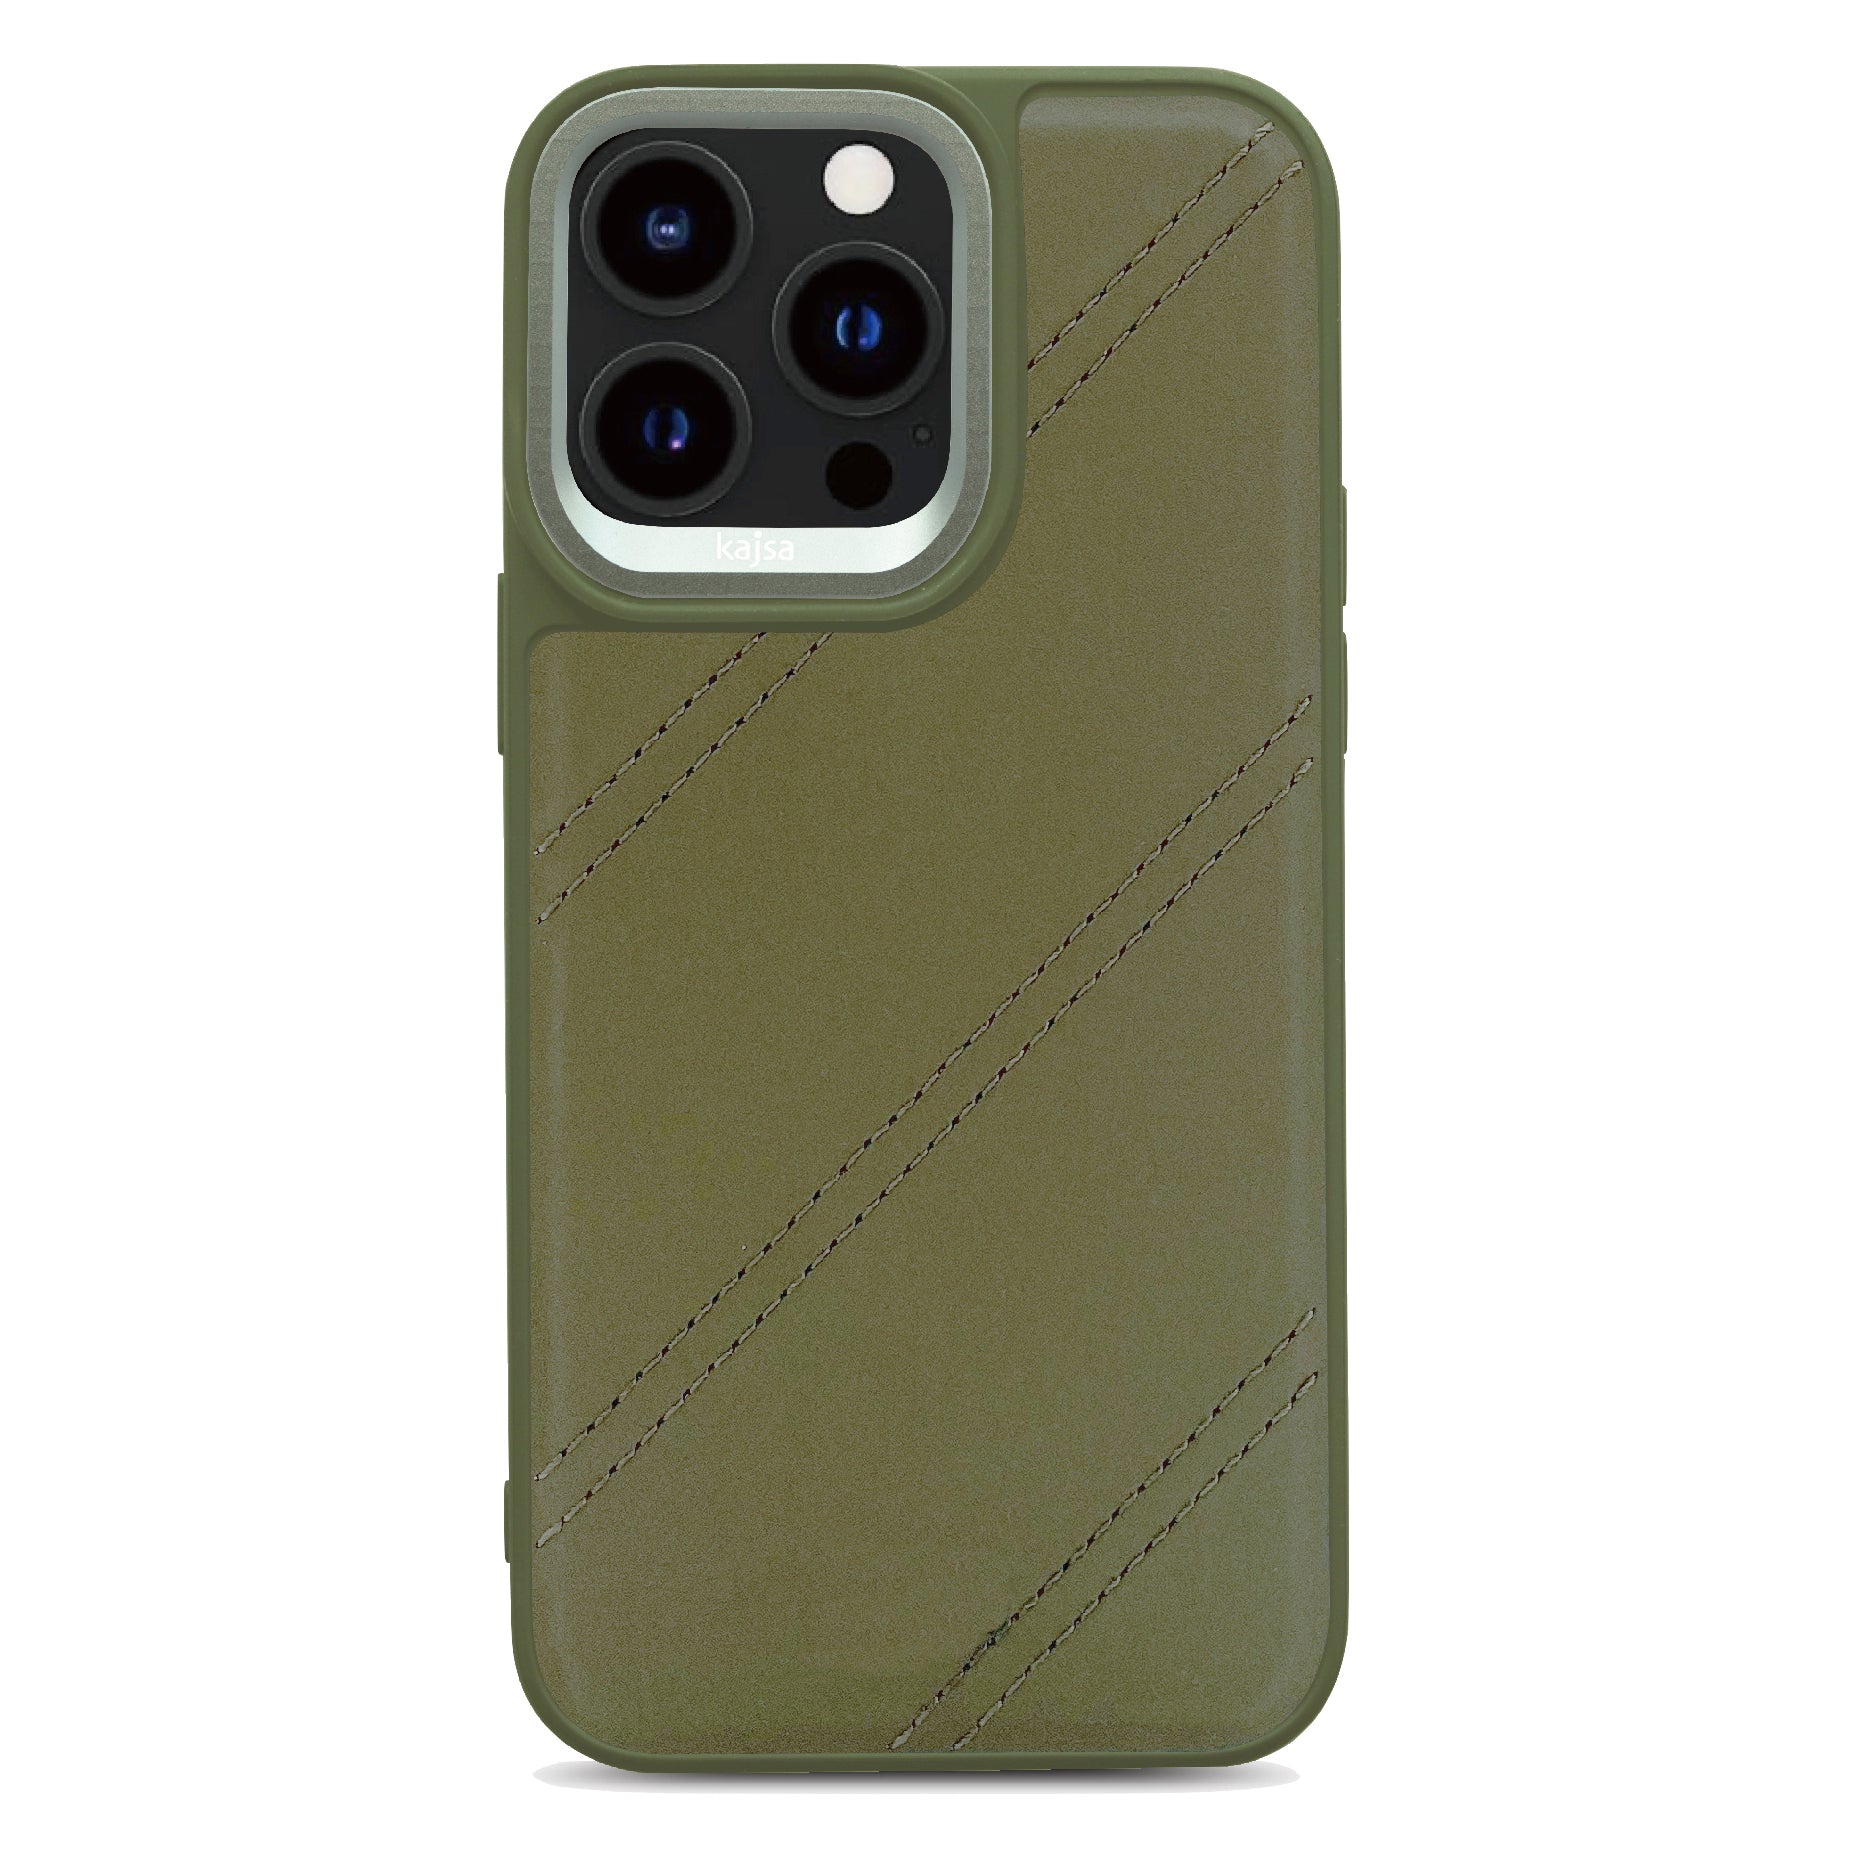 Dale Collection - Double Line I Back Case for iPhone 14-Phone Case- phone case - phone cases- phone cover- iphone cover- iphone case- iphone cases- leather case- leather cases- DIYCASE - custom case - leather cover - hand strap case - croco pattern case - snake pattern case - carbon fiber phone case - phone case brand - unique phone case - high quality - phone case brand - protective case - buy phone case hong kong - online buy phone case - iphone‎手機殼 - 客製化手機殼 - samsung ‎手機殼 - 香港手機殼 - 買電話殼